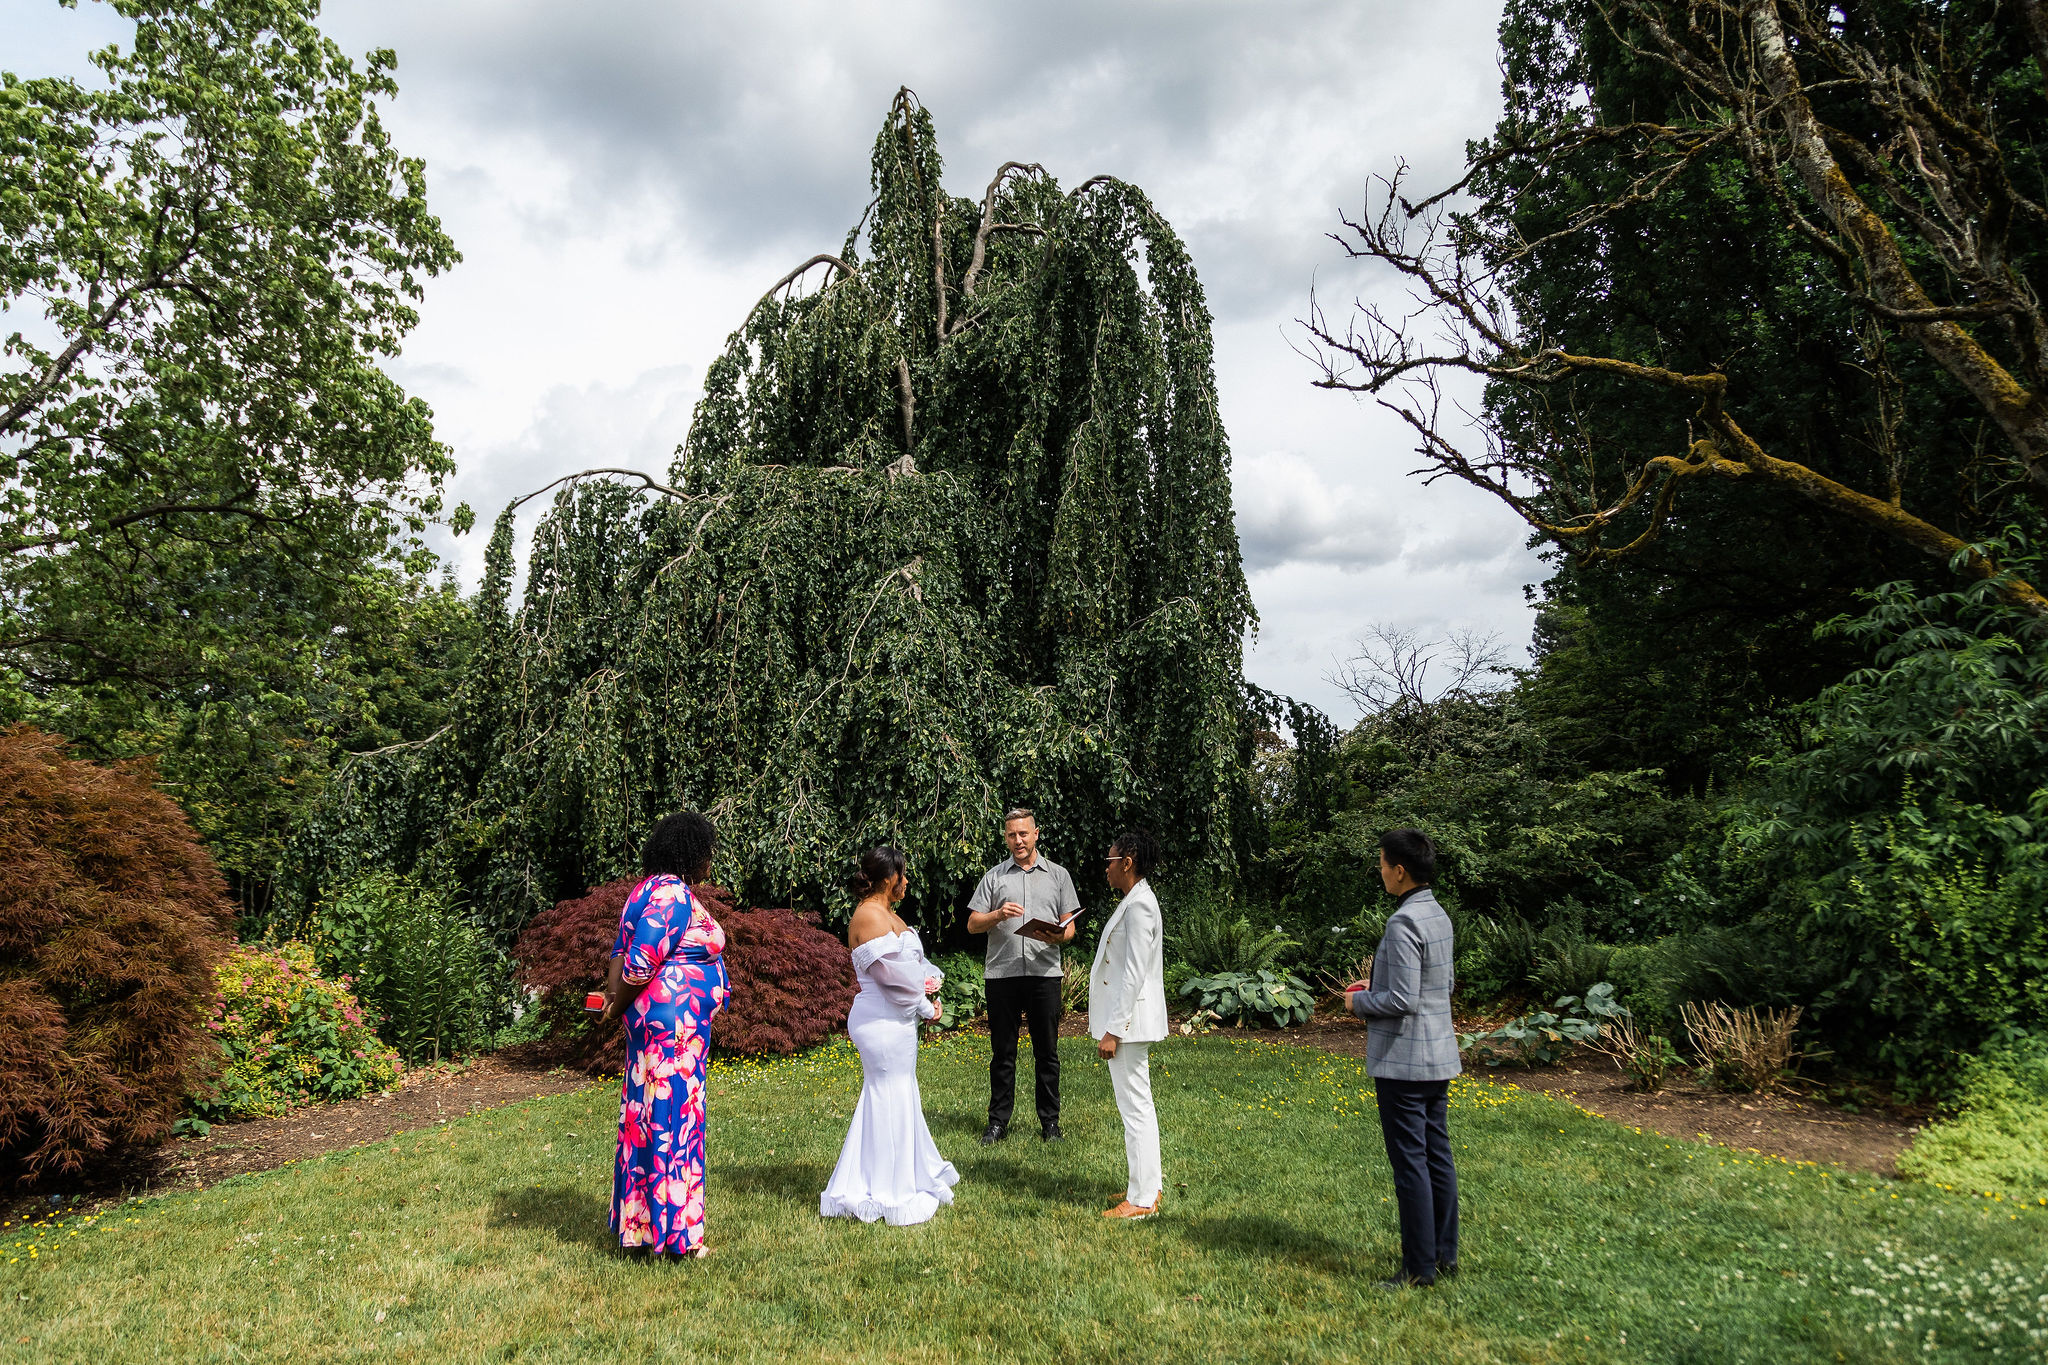 Queen Elizabeth Park Vancouver wedding with young hip & married lgbtq+ 